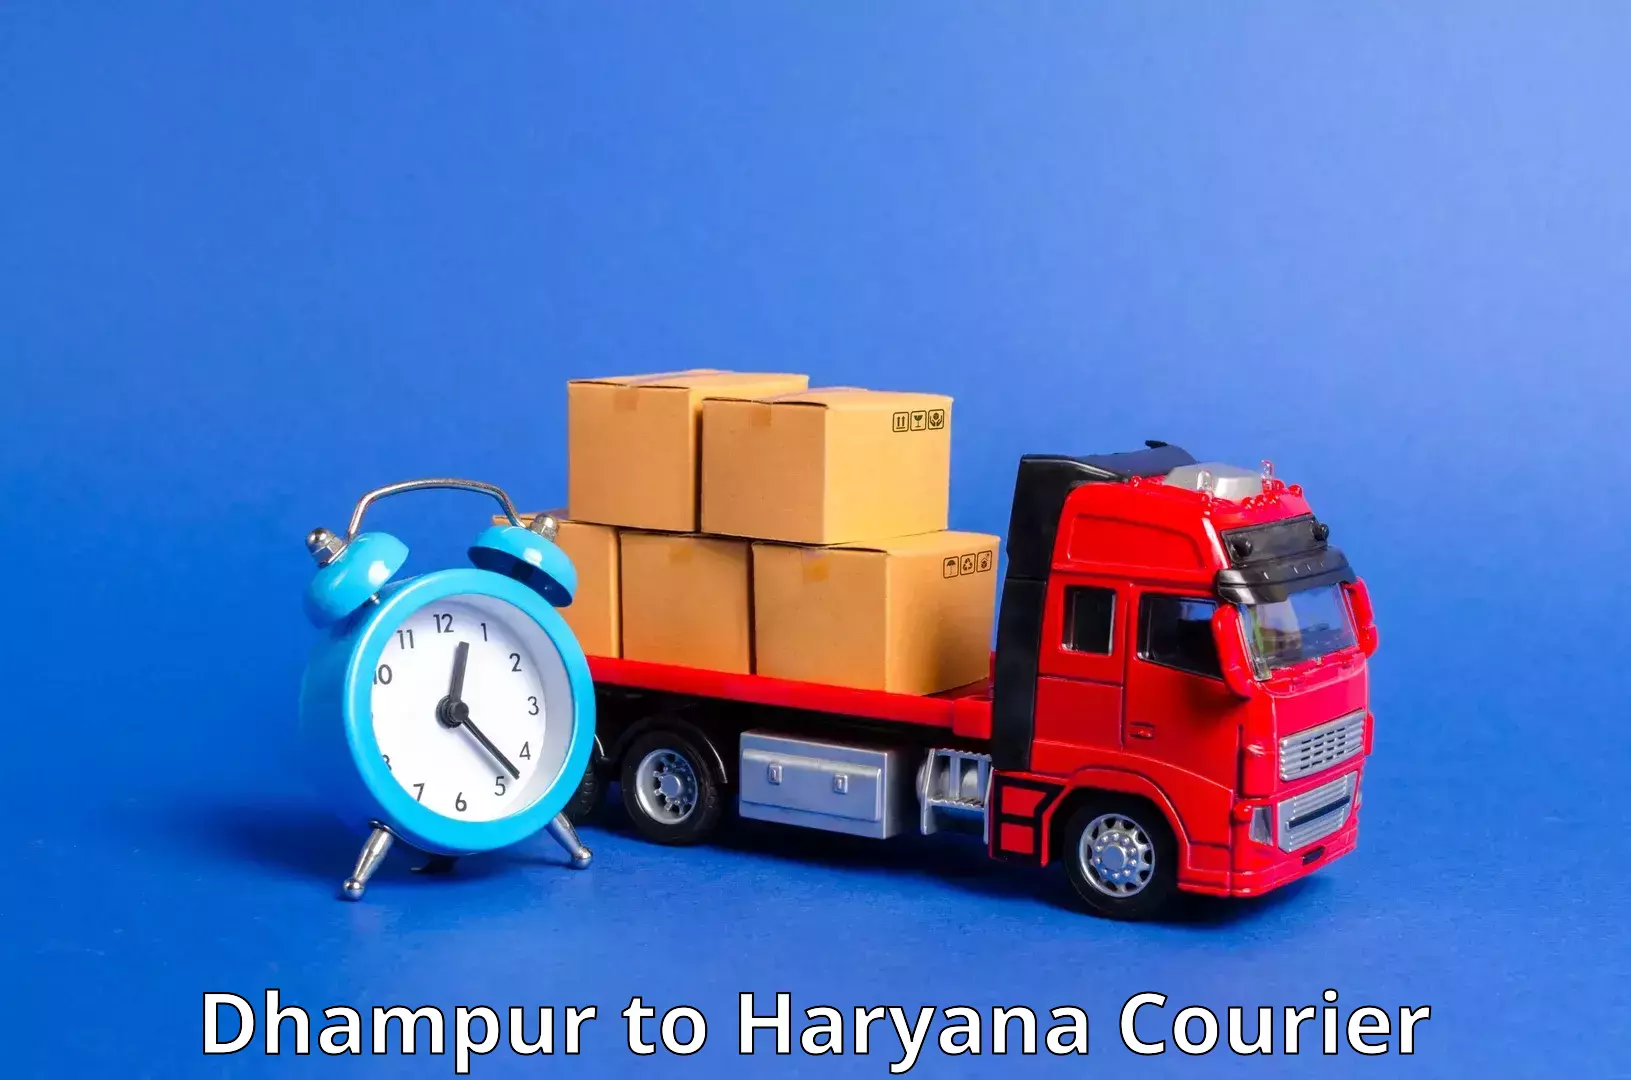 High-capacity parcel service Dhampur to Charkhi Dadri